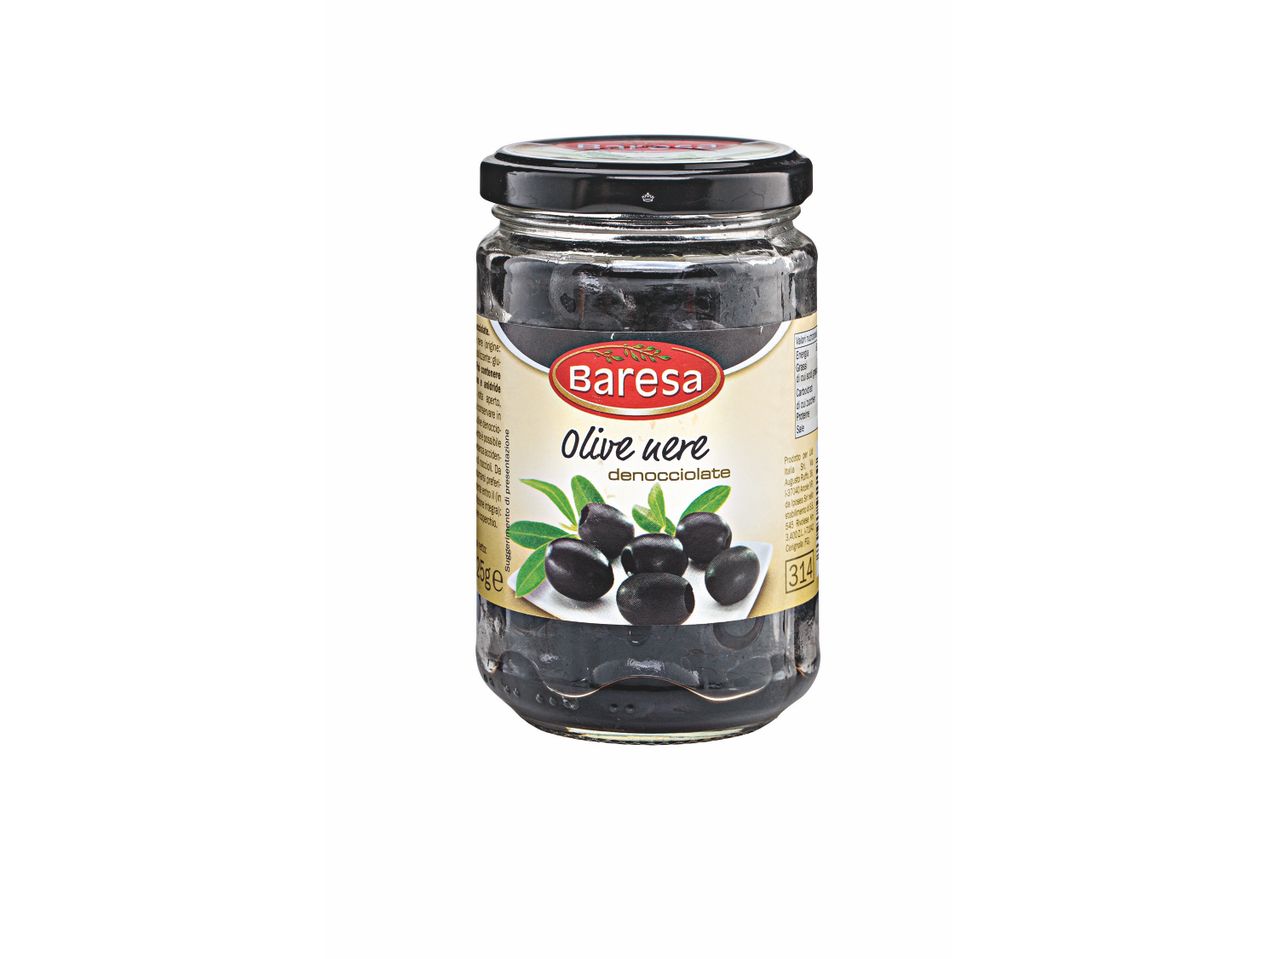 Go to full screen view: Whole Black Olives - Image 1